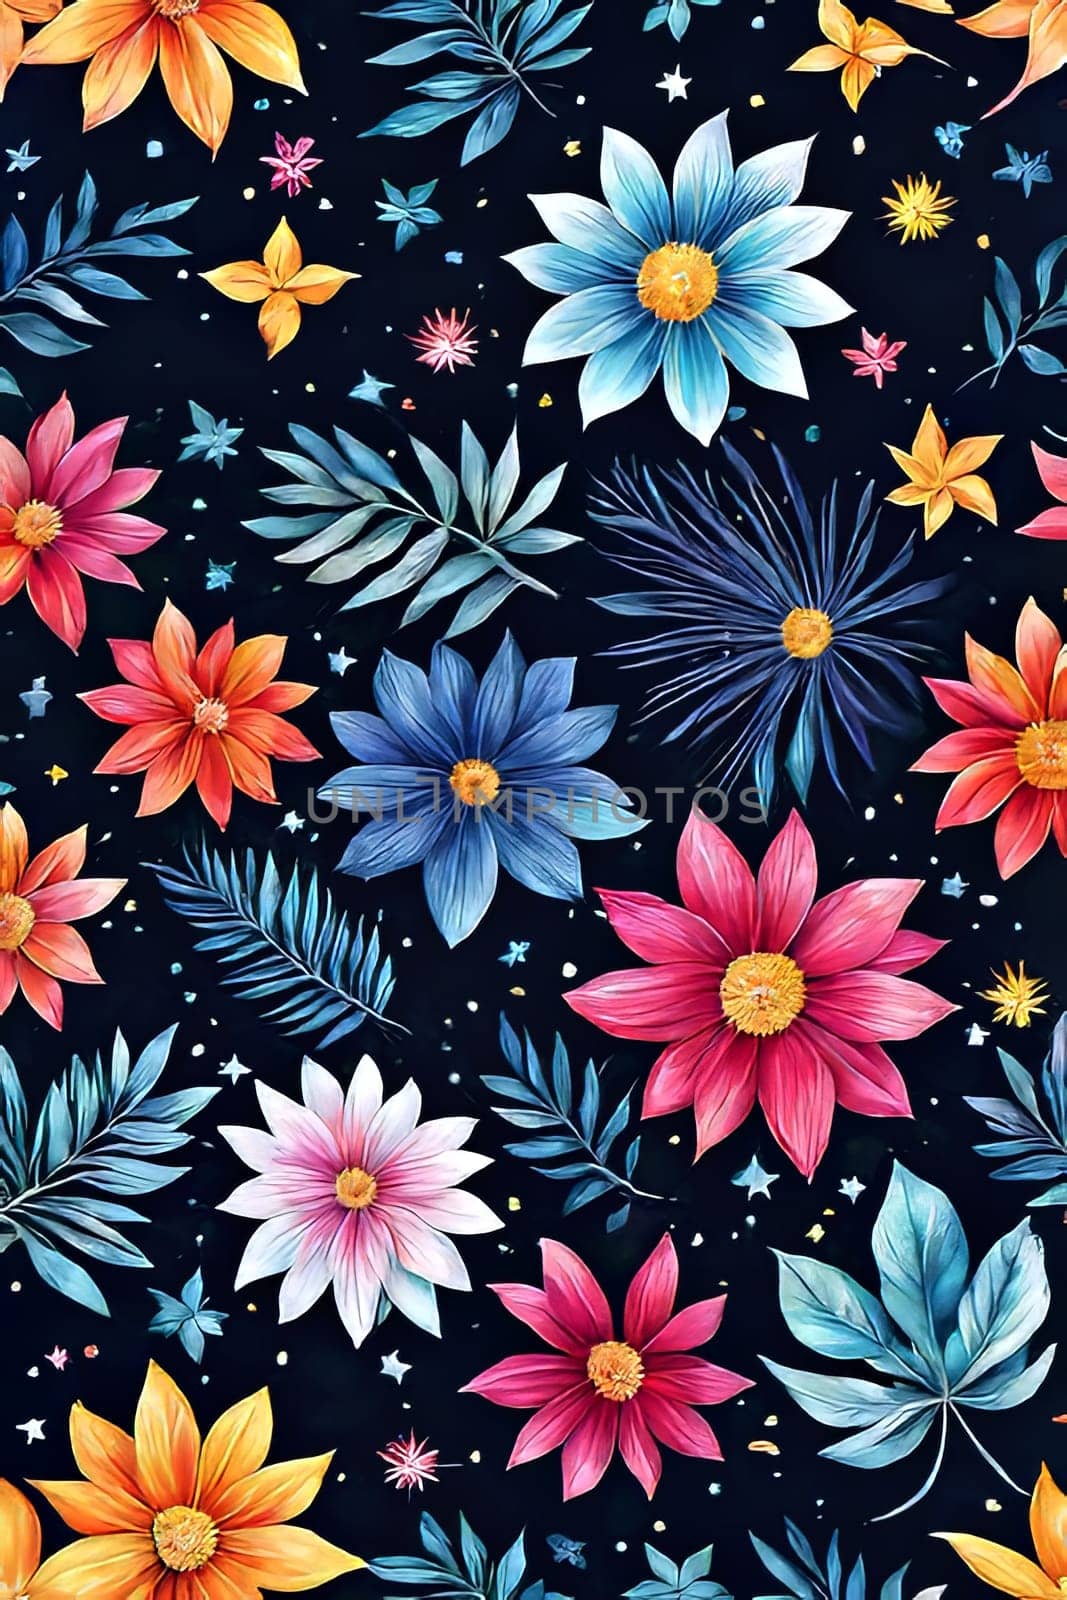 Vibrant colorful flowers set against dark background. For meditation apps, on covers of books about spiritual growth, in designs for yoga studios, spa salons, illustration for articles on inner peace